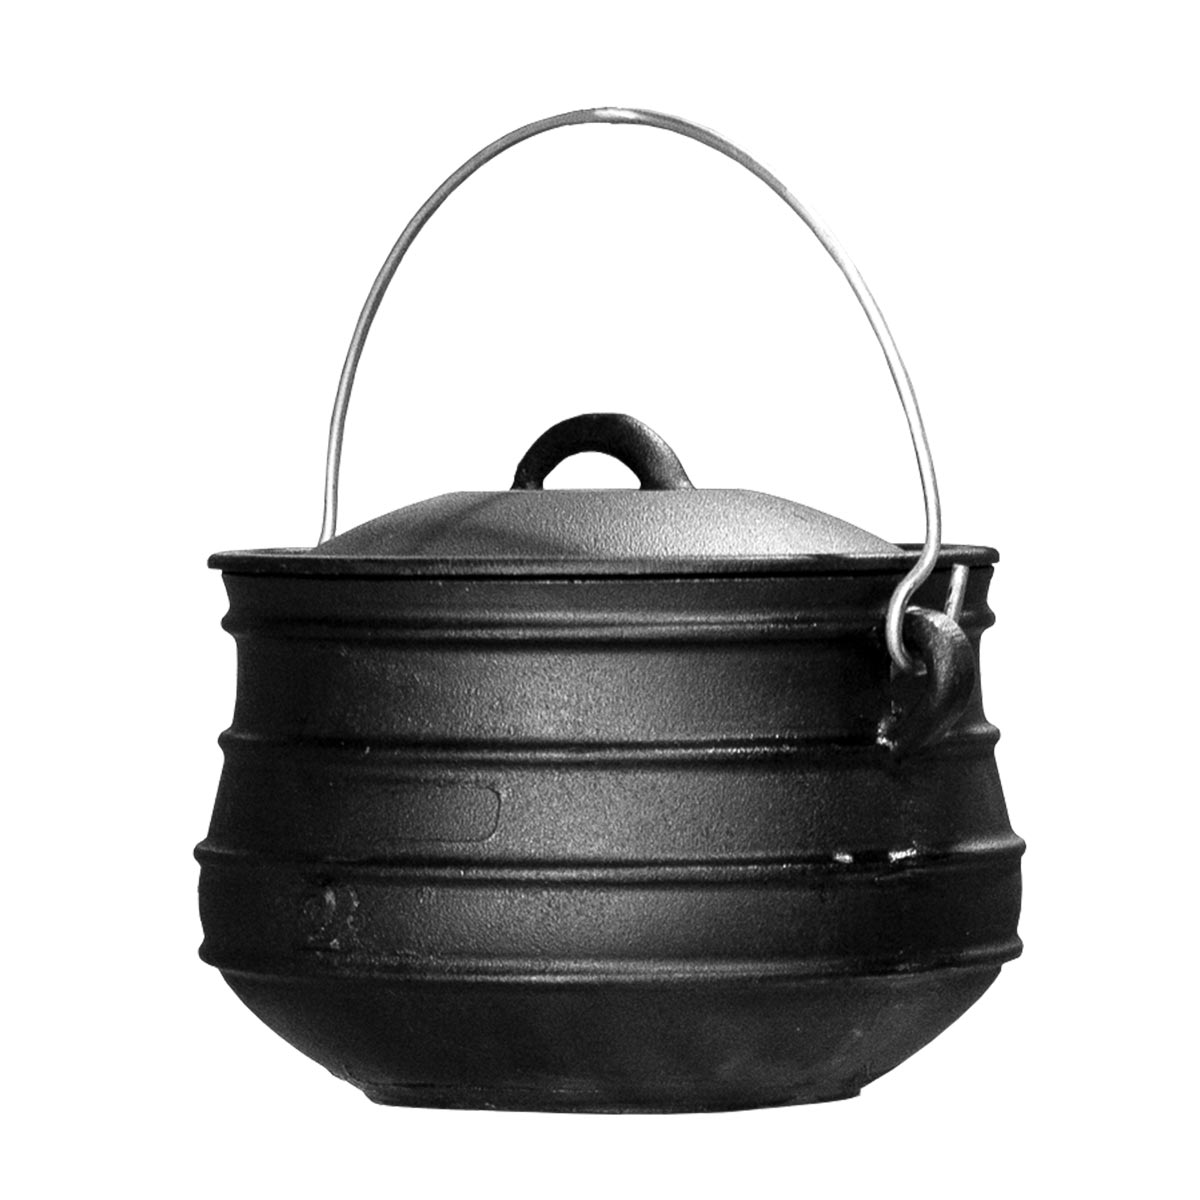 BREEO Cast Iron Kettle with Lid